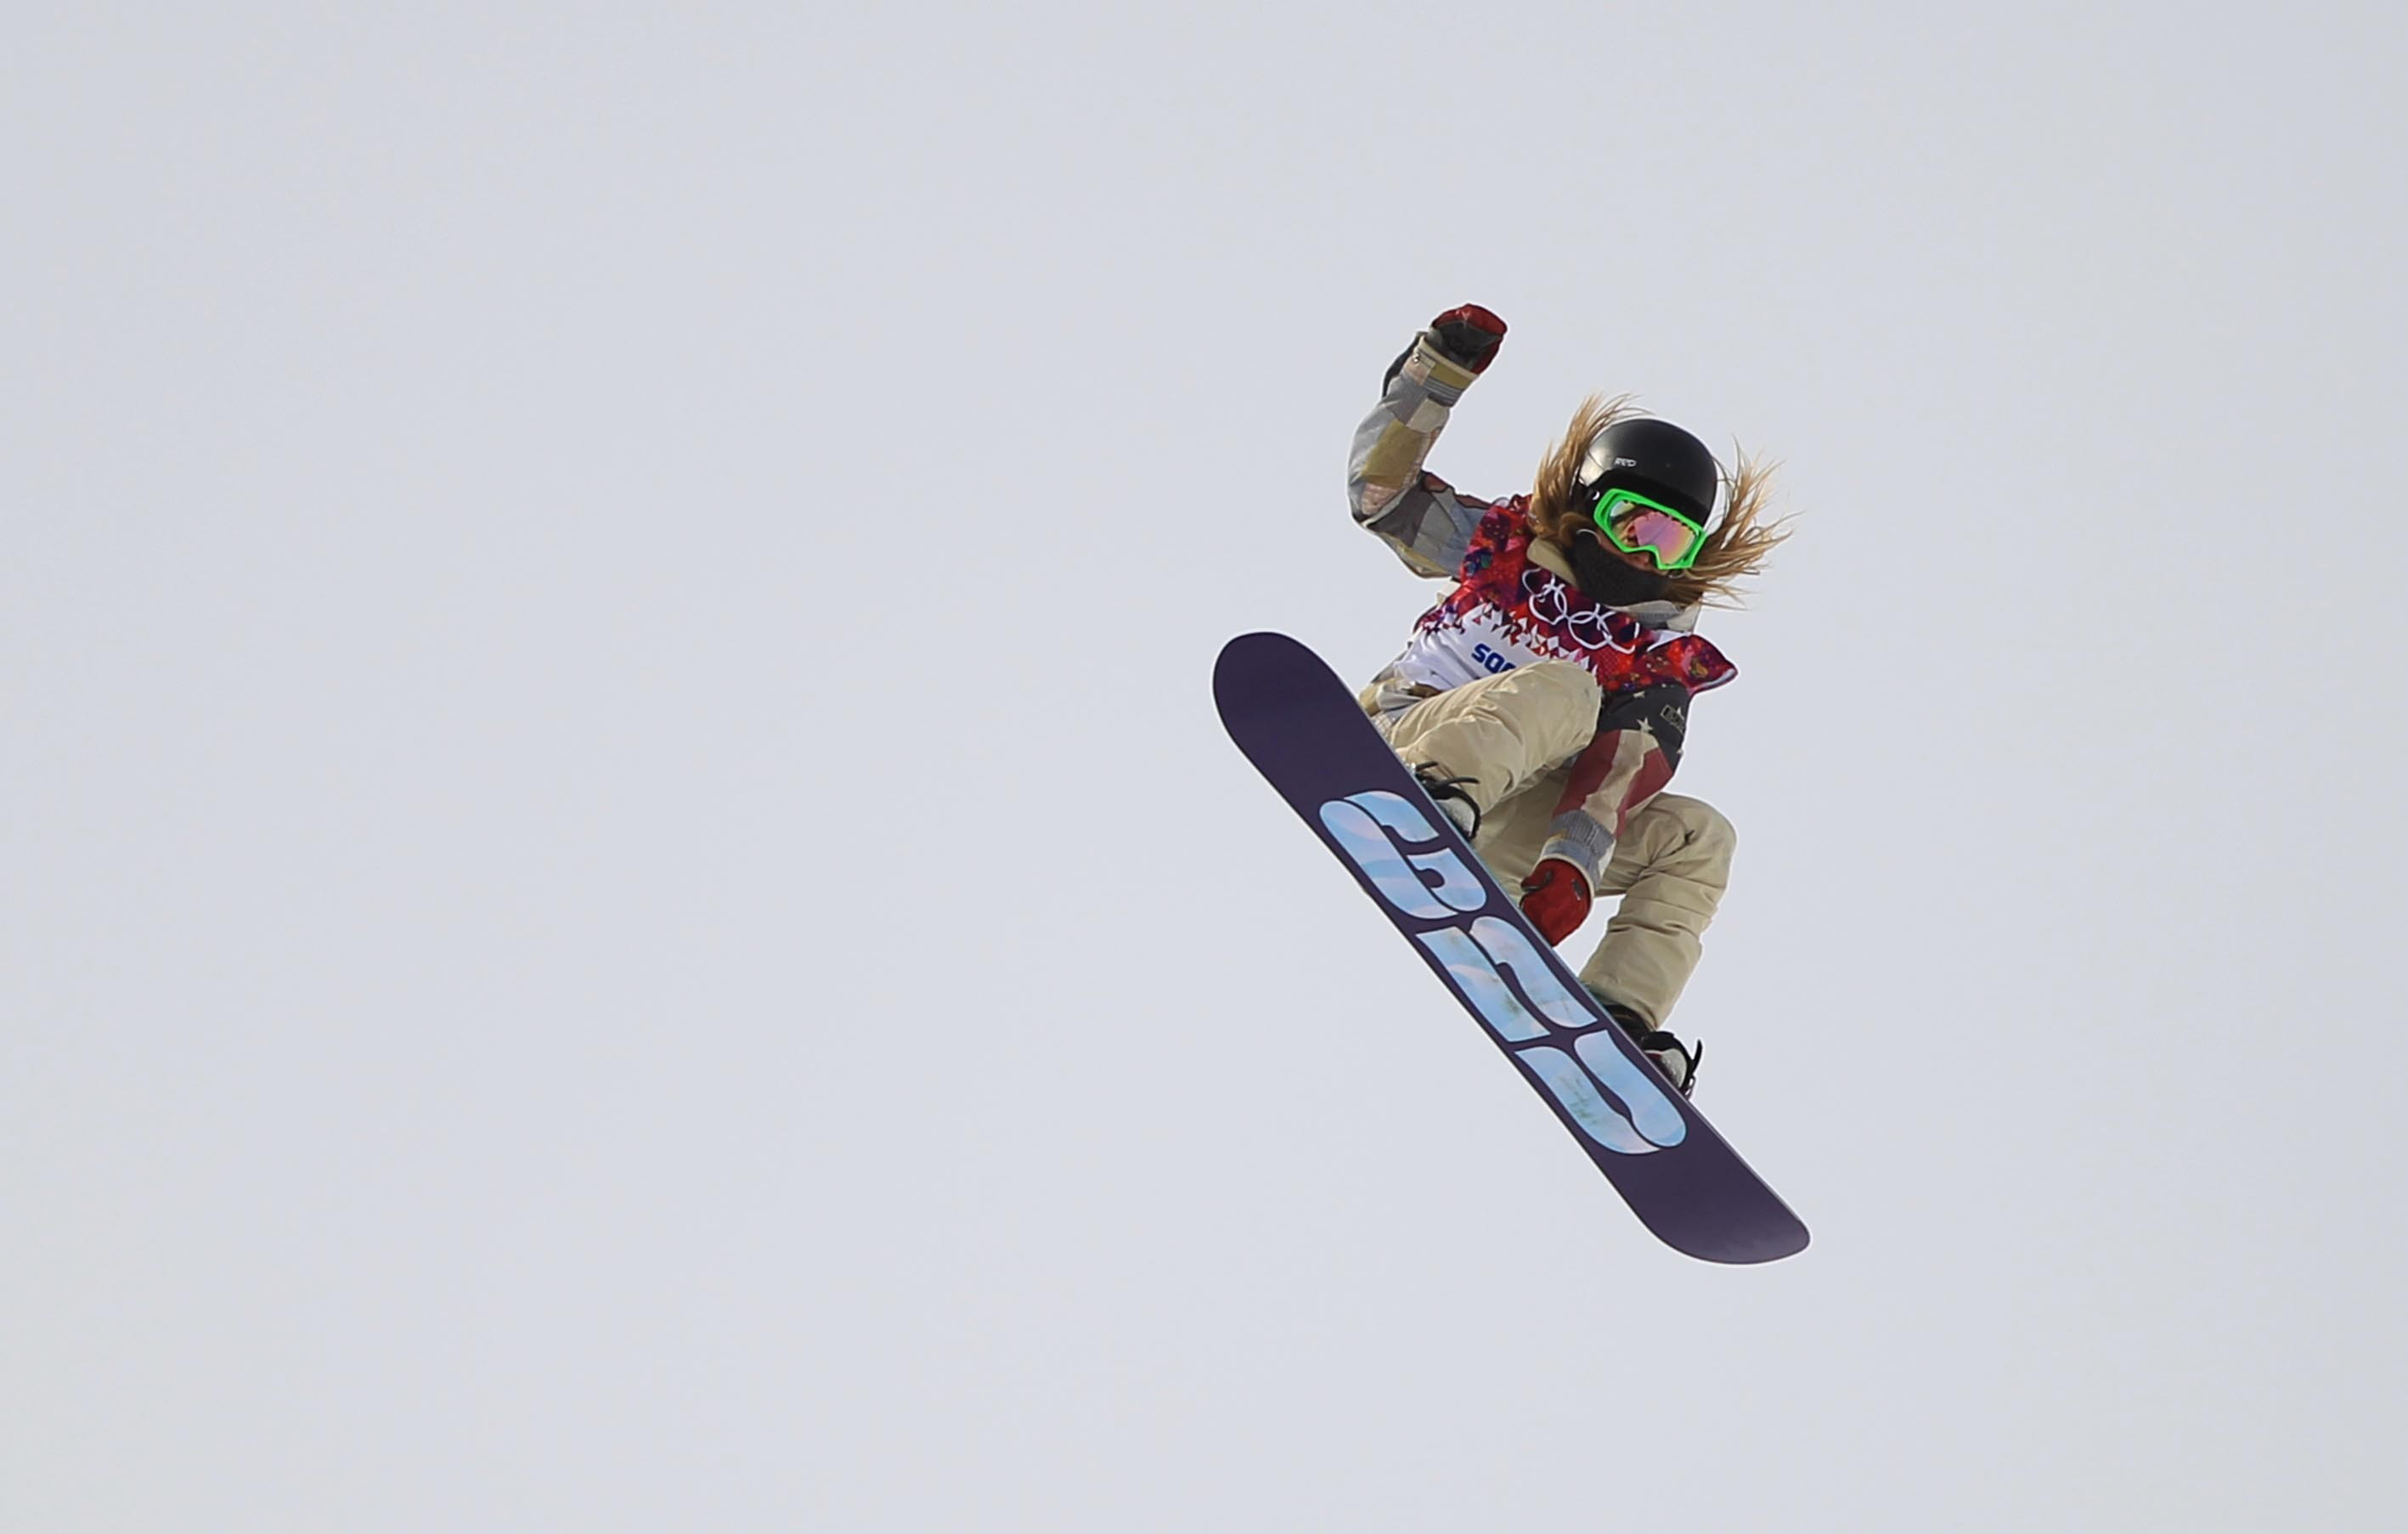 Jamie Anderson of United States wins the gold medal at the final competition in slopestyle Sunday at the Sochi 2014 Winter Olympics (Anadolu Agency / Getty Images)